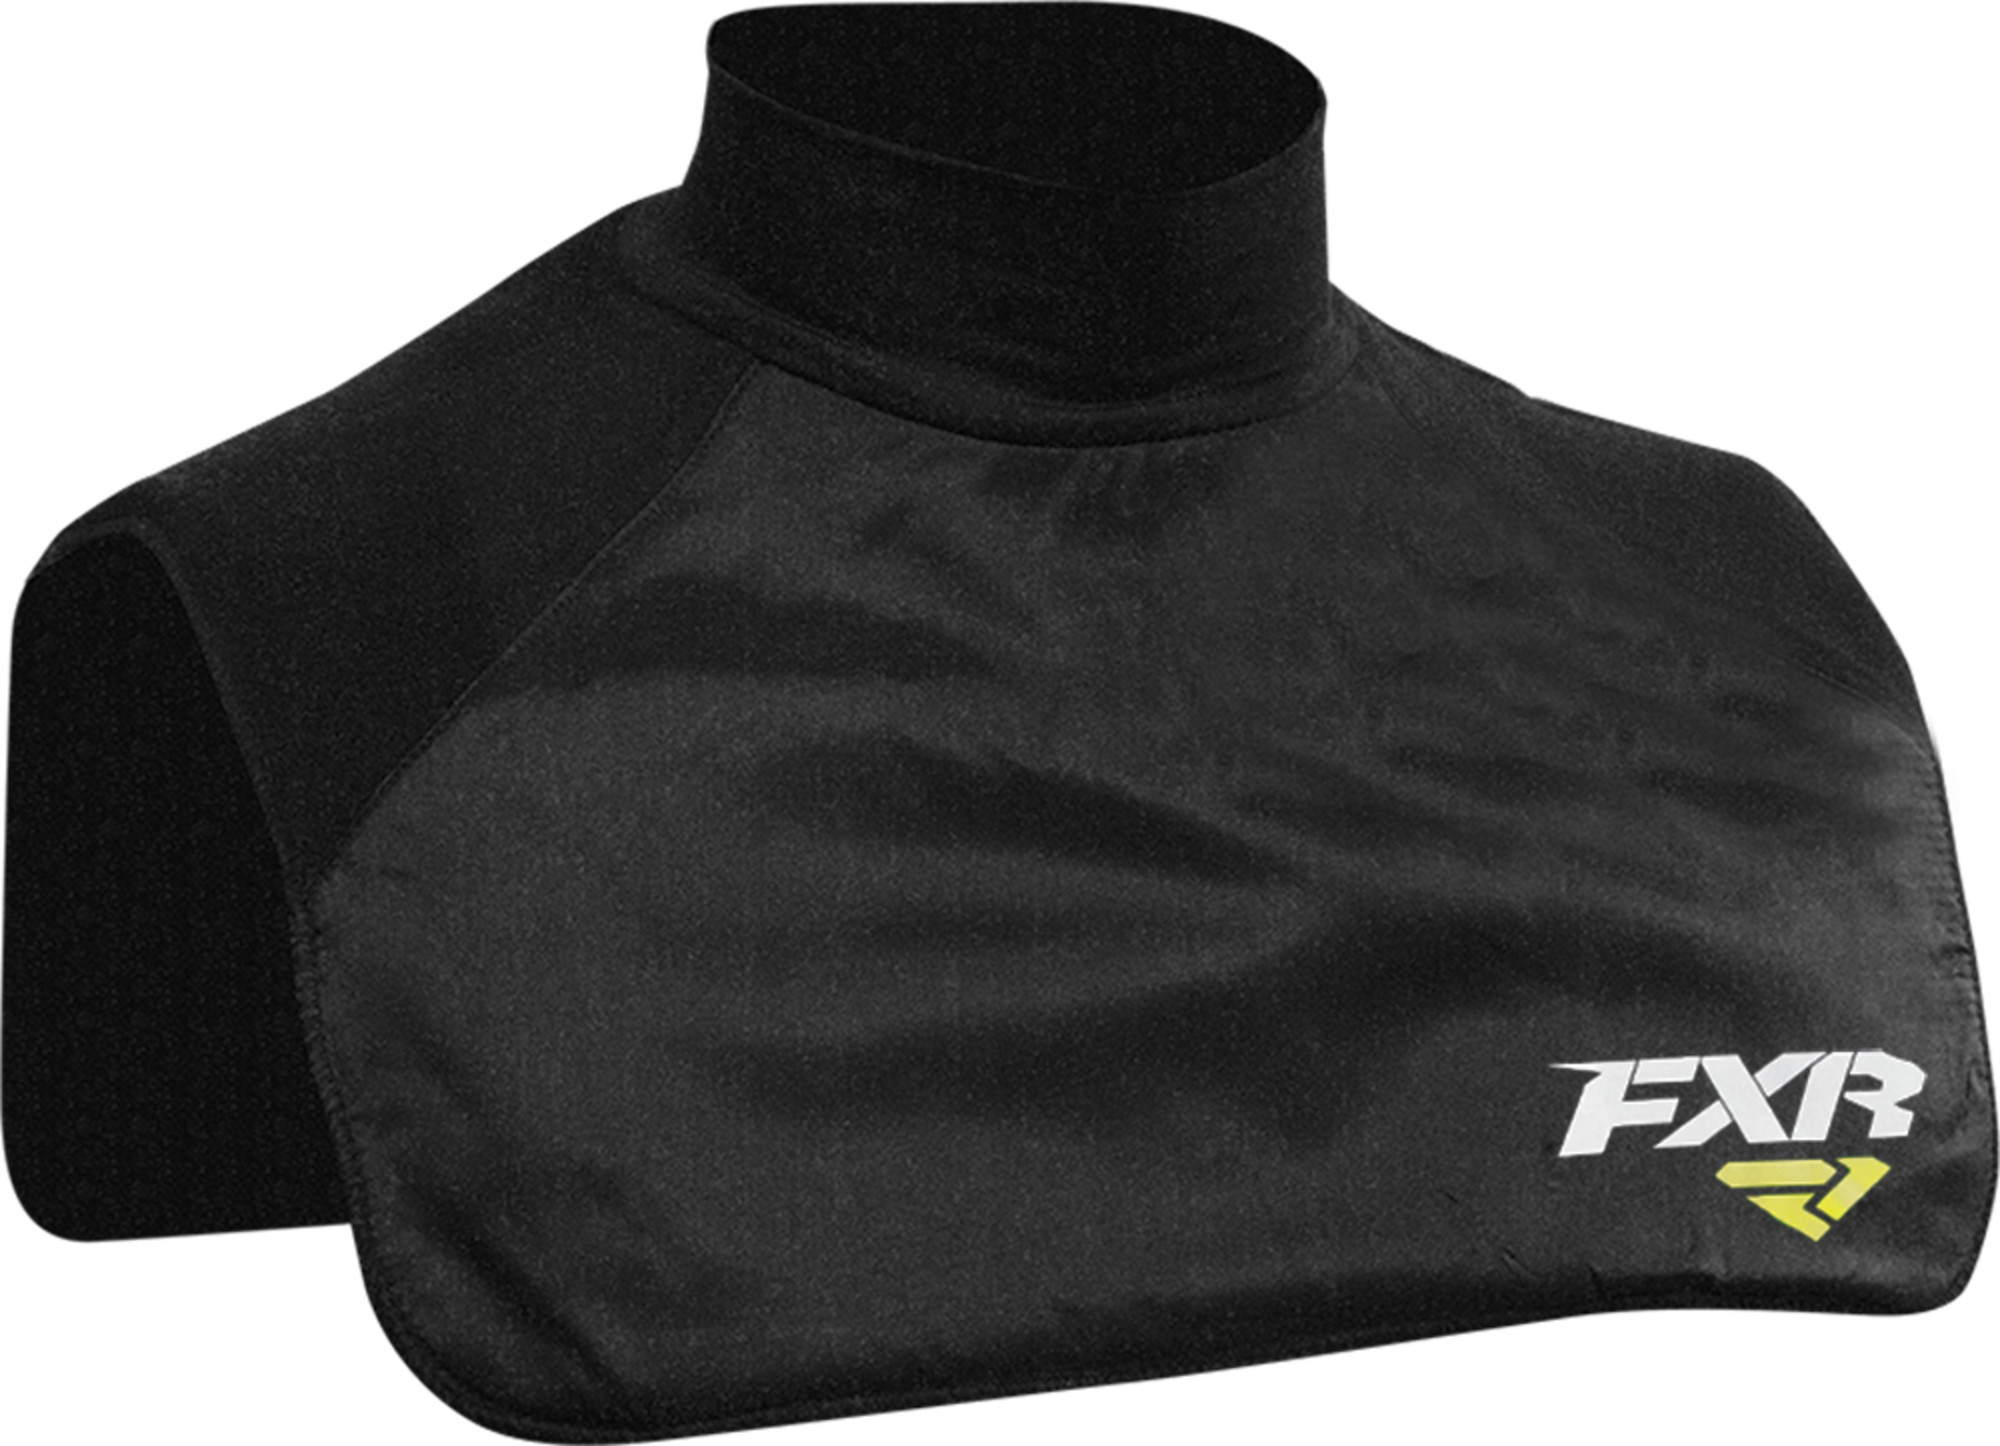 fxr racing neck warmers headwear adult cold stop